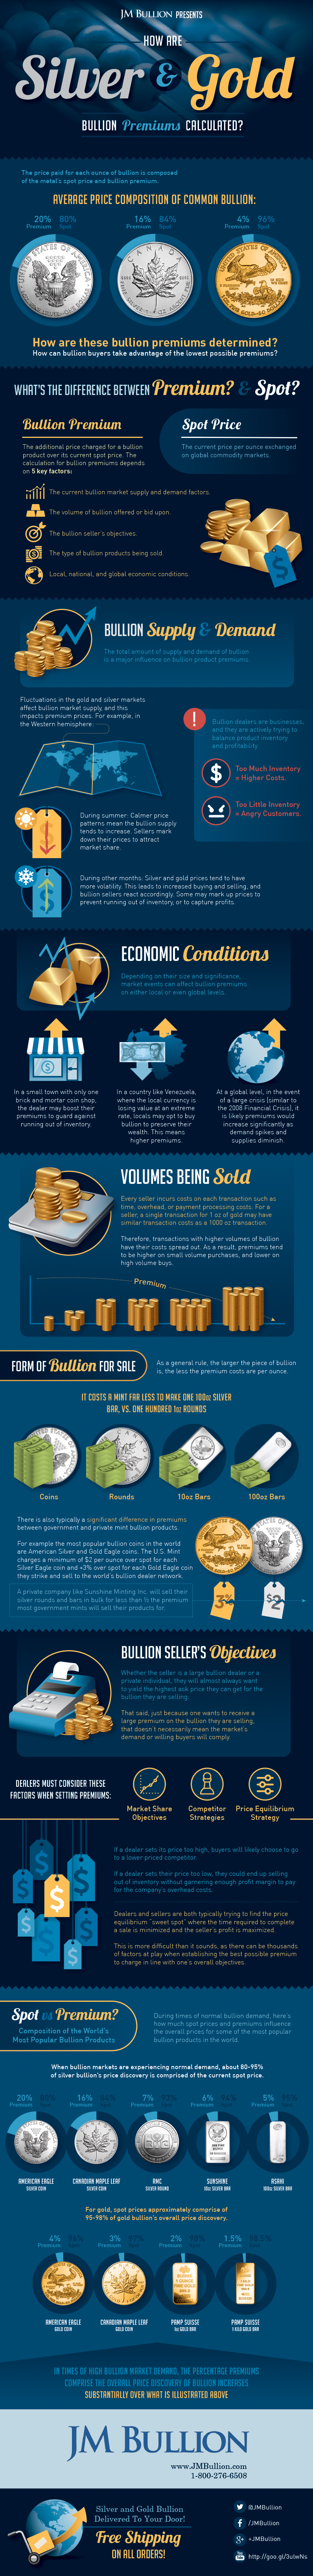 How are Silver and Gold Bullion Premiums Calculated?